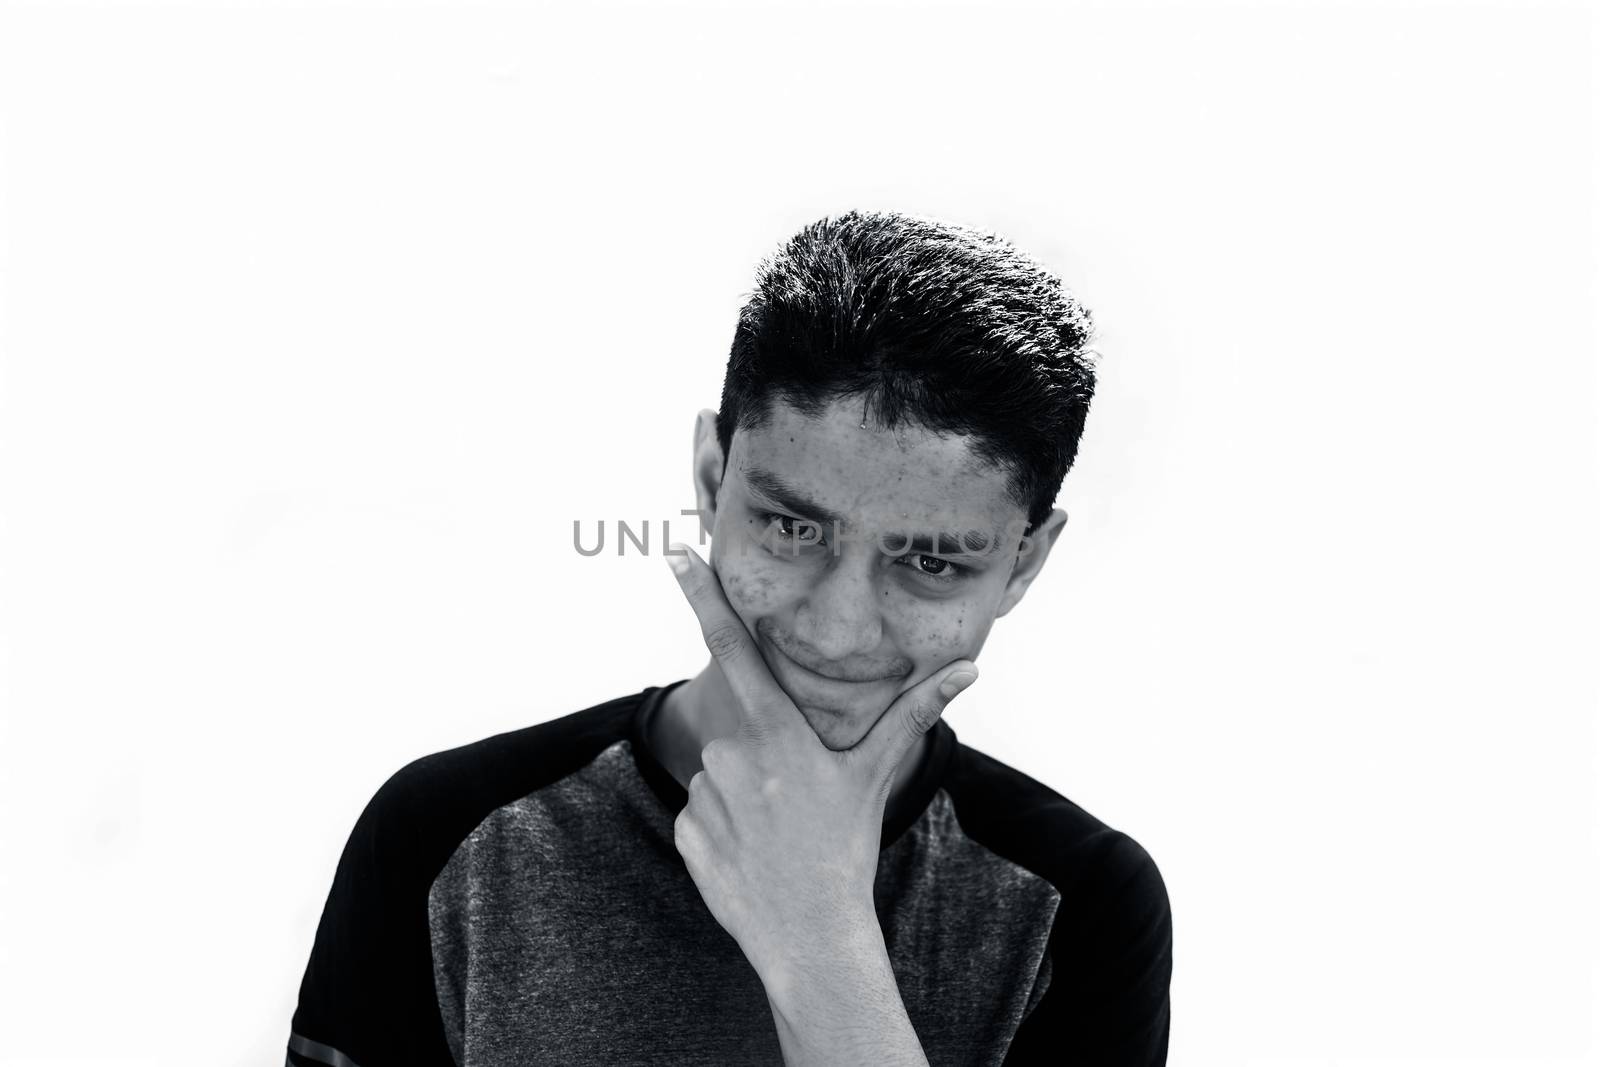 Portrait shot of young teenager or youngster isolated on white expressing some doubtfulness on his face wearing a Grey and black t shirt.